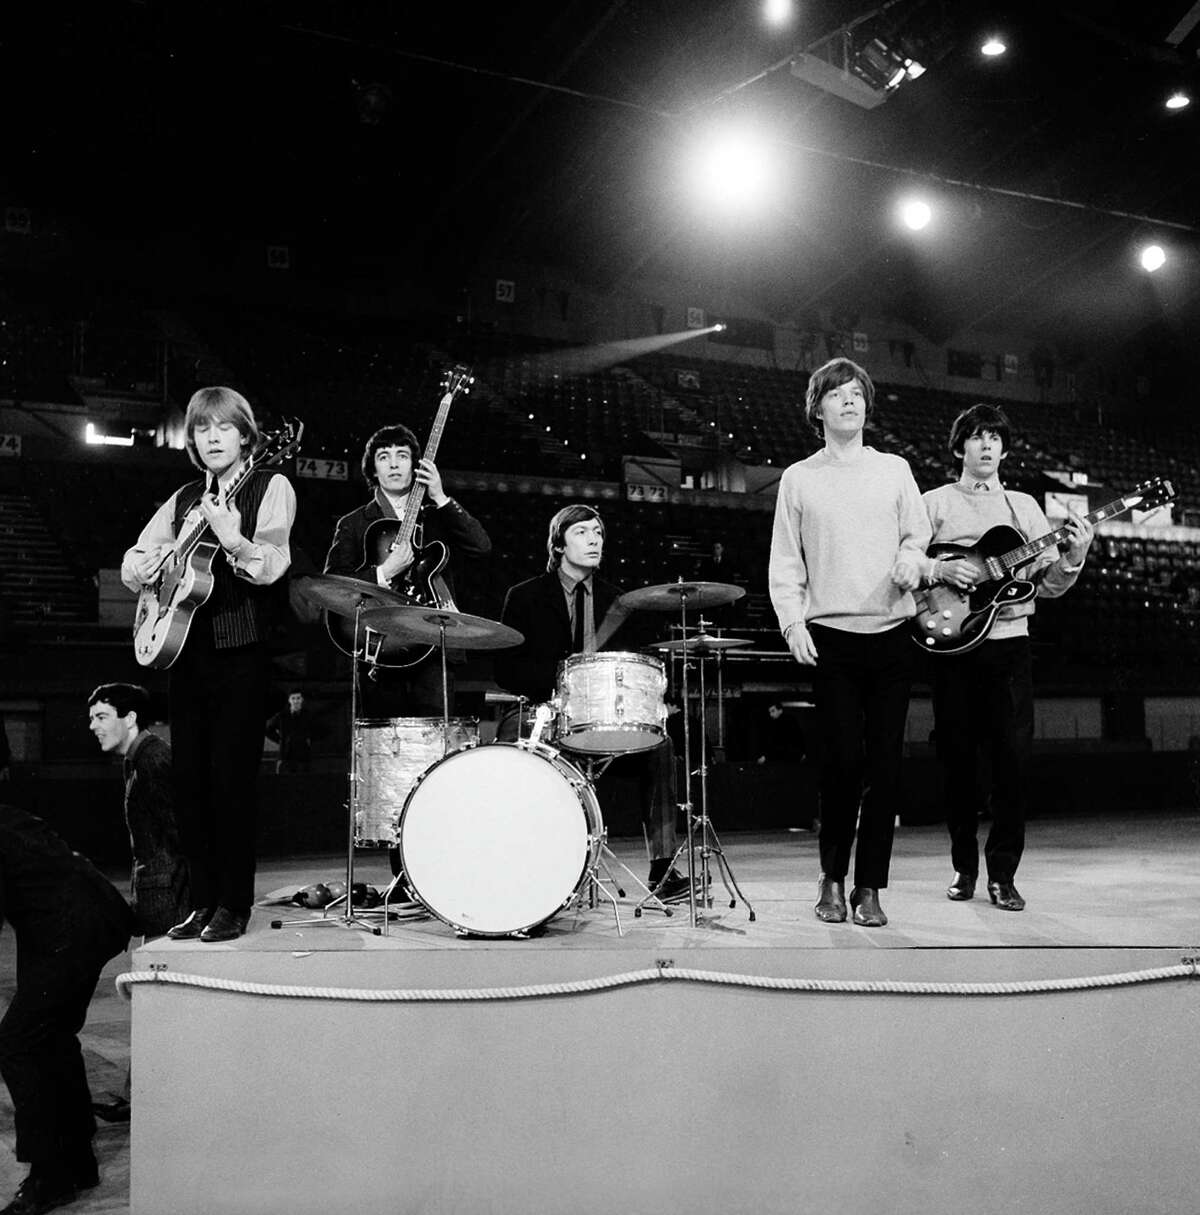 EMBARGO UNTIL 5 AM FEB. 27, 2013 - FILE - This April 8, 1964 file photo shows The Rolling Stones during a rehearsal at an unknown location. The British band members, from left, are, Brian Jones, guitar; Bill Wyman, bass; Charlie Watts, drums; Mick Jagger, vocals; and Keith Richards, guitar. The Cleveland-based The Rock and Roll Hall of Fame Museum will open ?“Rolling Stones: 50 Years of Satisfaction,?” an exclusive exhibit celebrating the archetypal rock band, on May 24, 2013. (AP Photo, File)